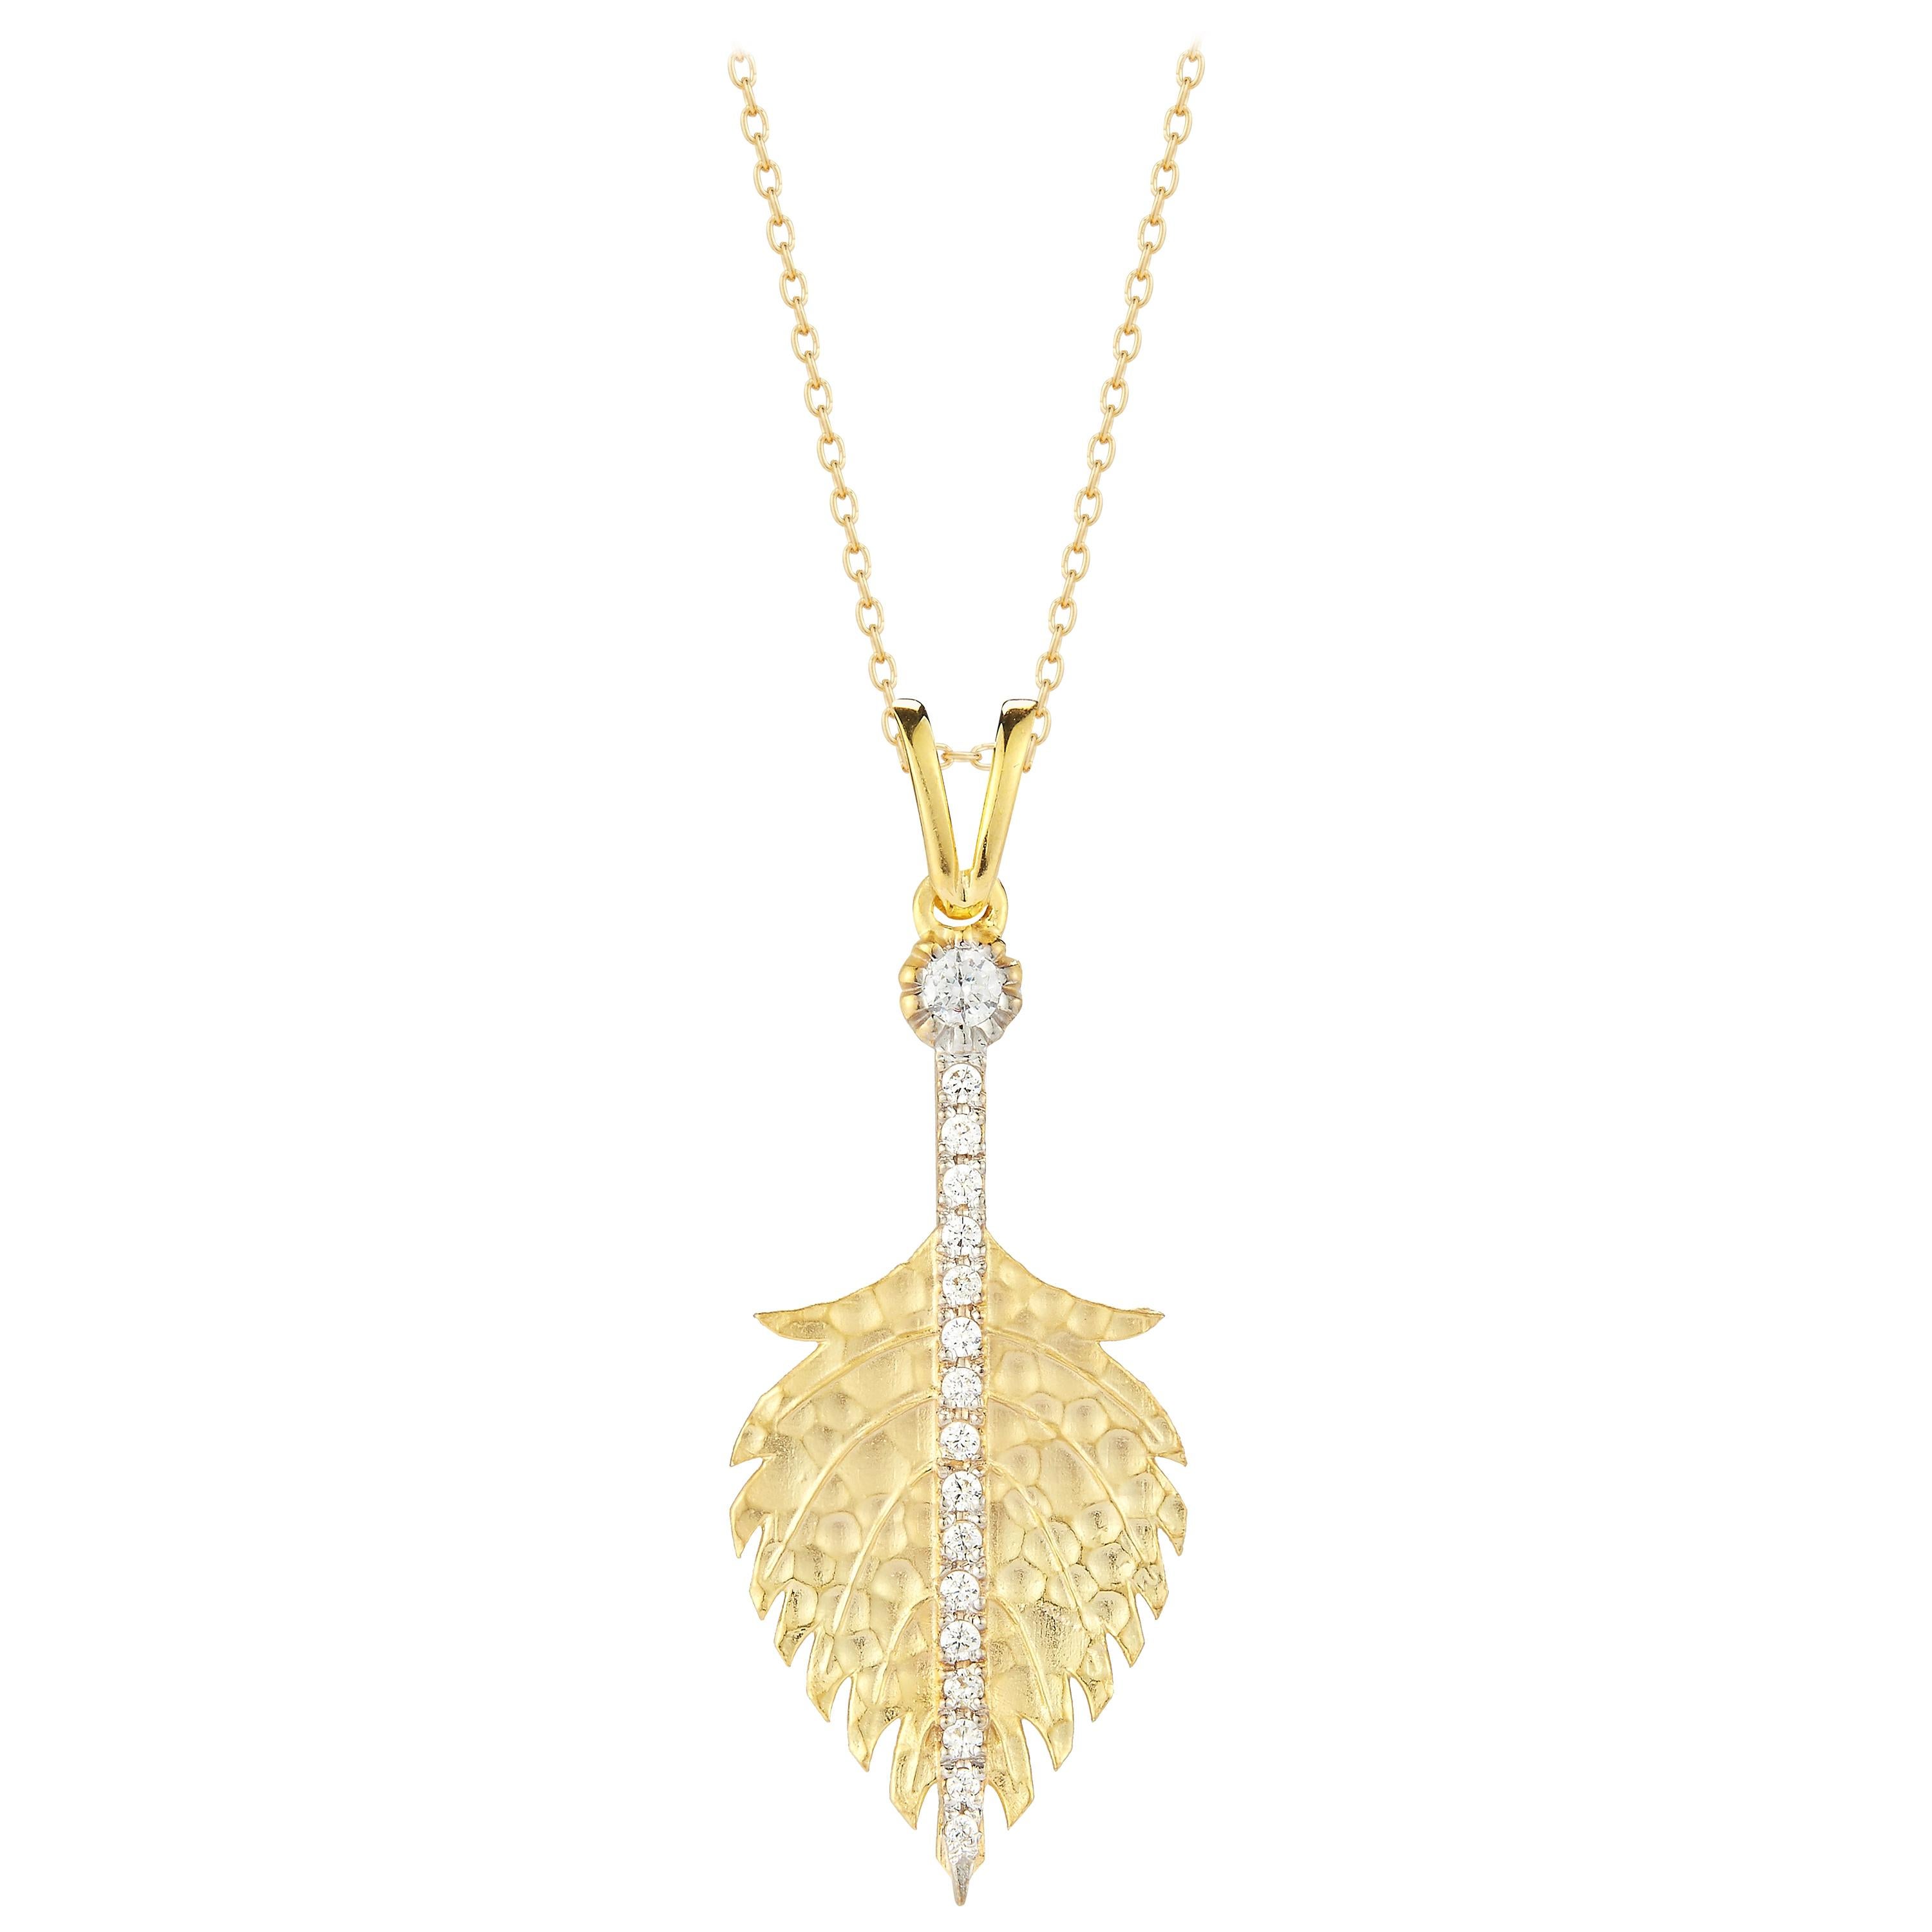 Handcrafted 14 Karat Yellow Gold Hammered Feather Pendant For Sale